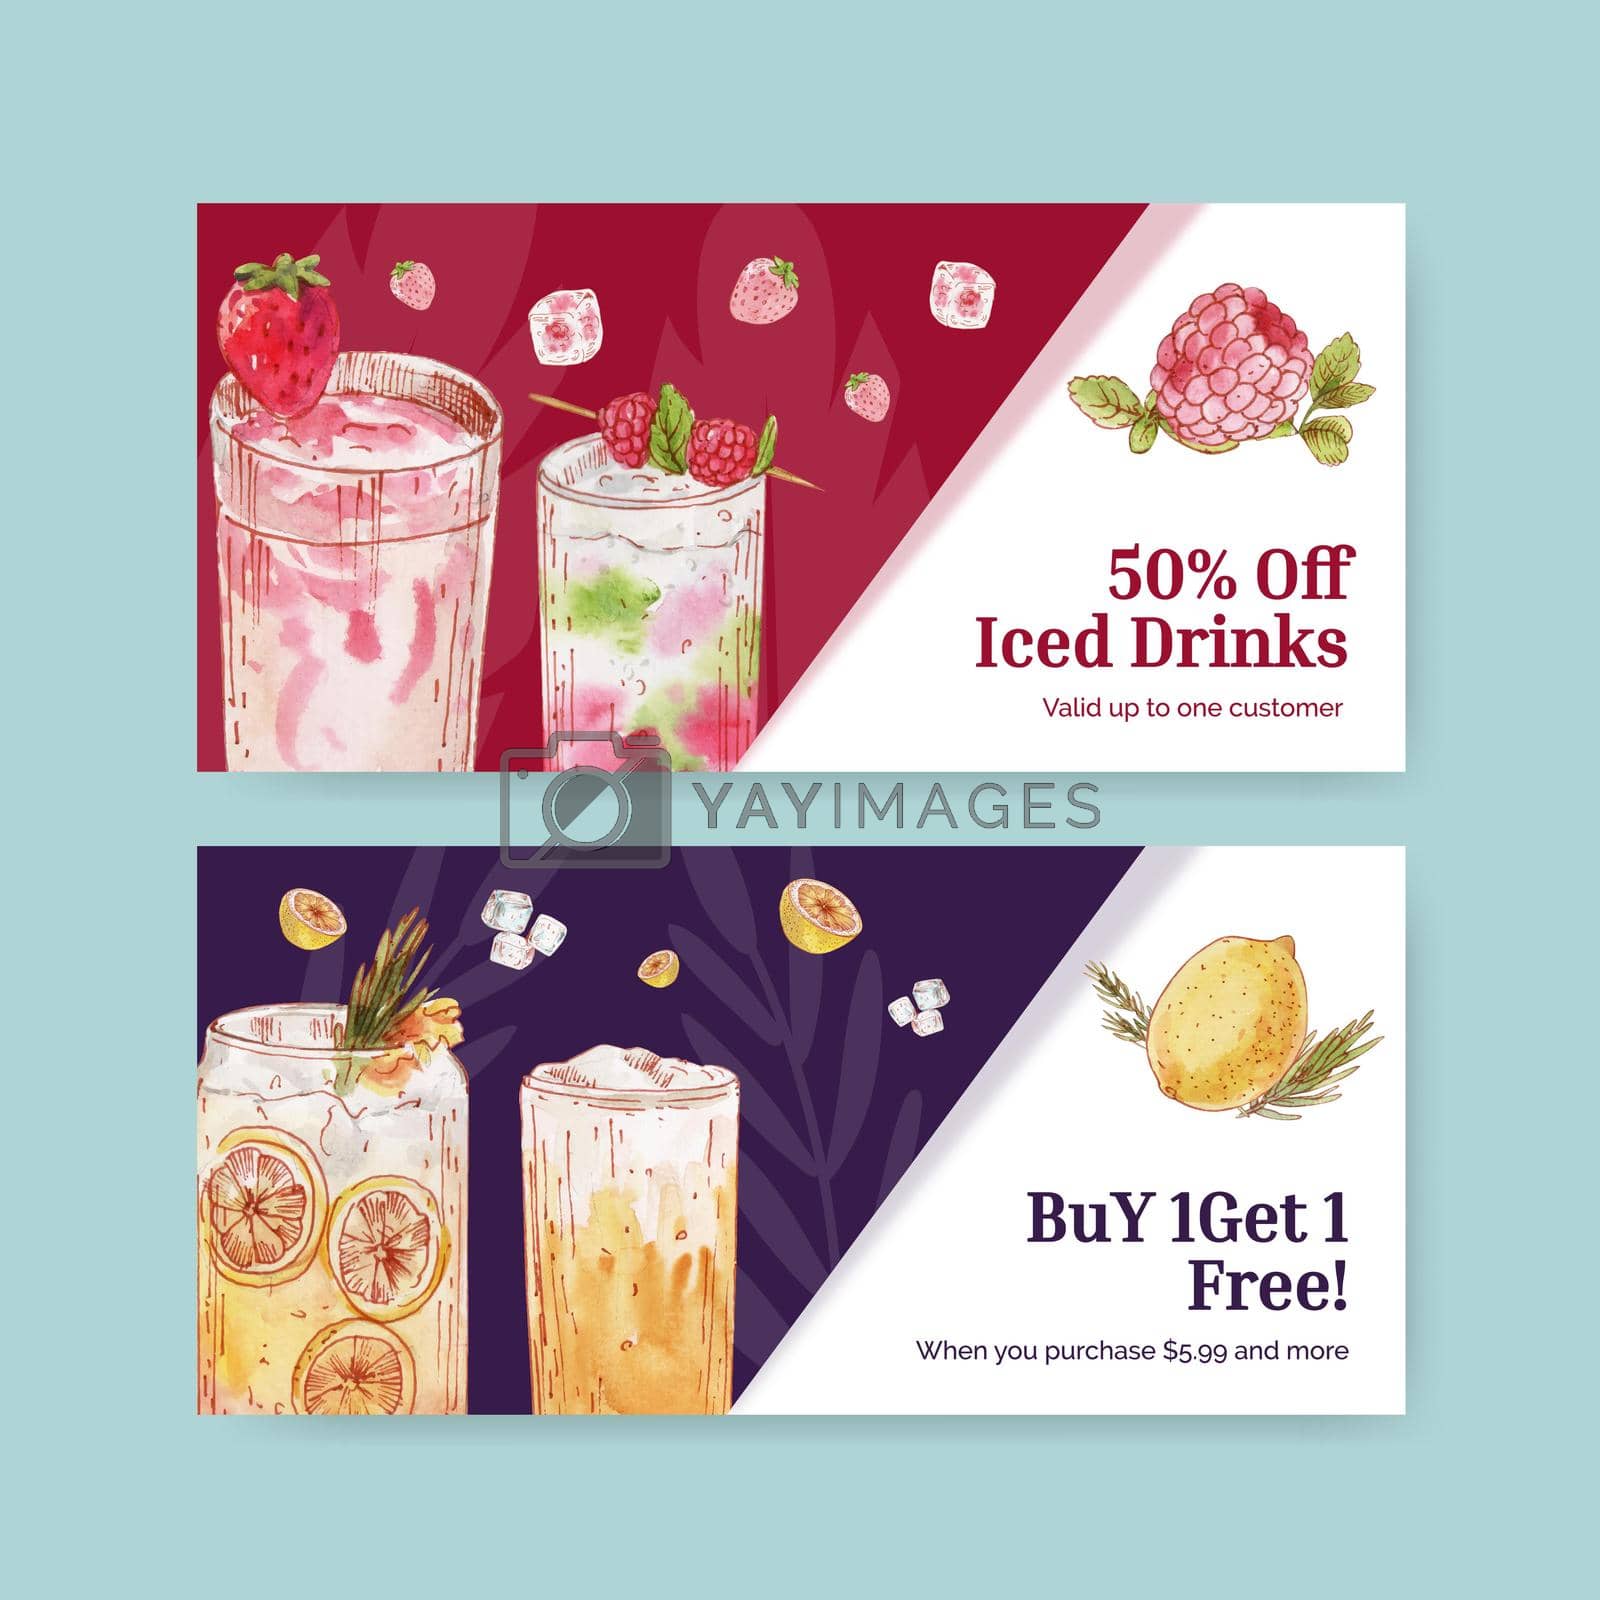 Royalty free image of Voucher template with refreshment drinks concept,watercolor style by Photographeeasia